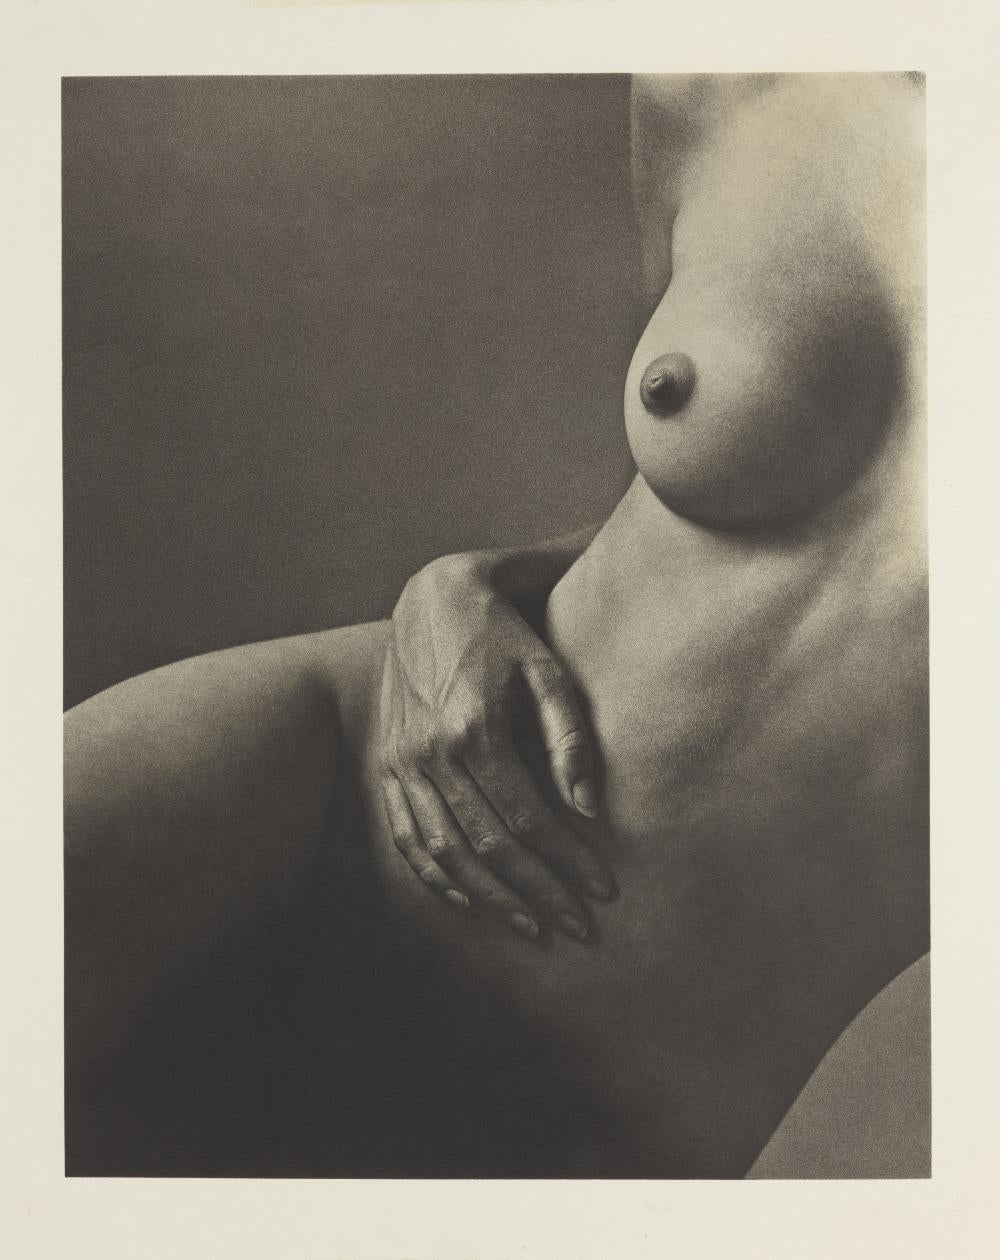 Nude Figure with Breast & Hand, Platinum Palladium Print on Wove by Contemporary British Artist, Malcolm Pasley (Born 1956)

Art measures 14 x 11 inches 
Frame measures 21 x 18 inches  

(Please note this is presented in a perfectly serviceable